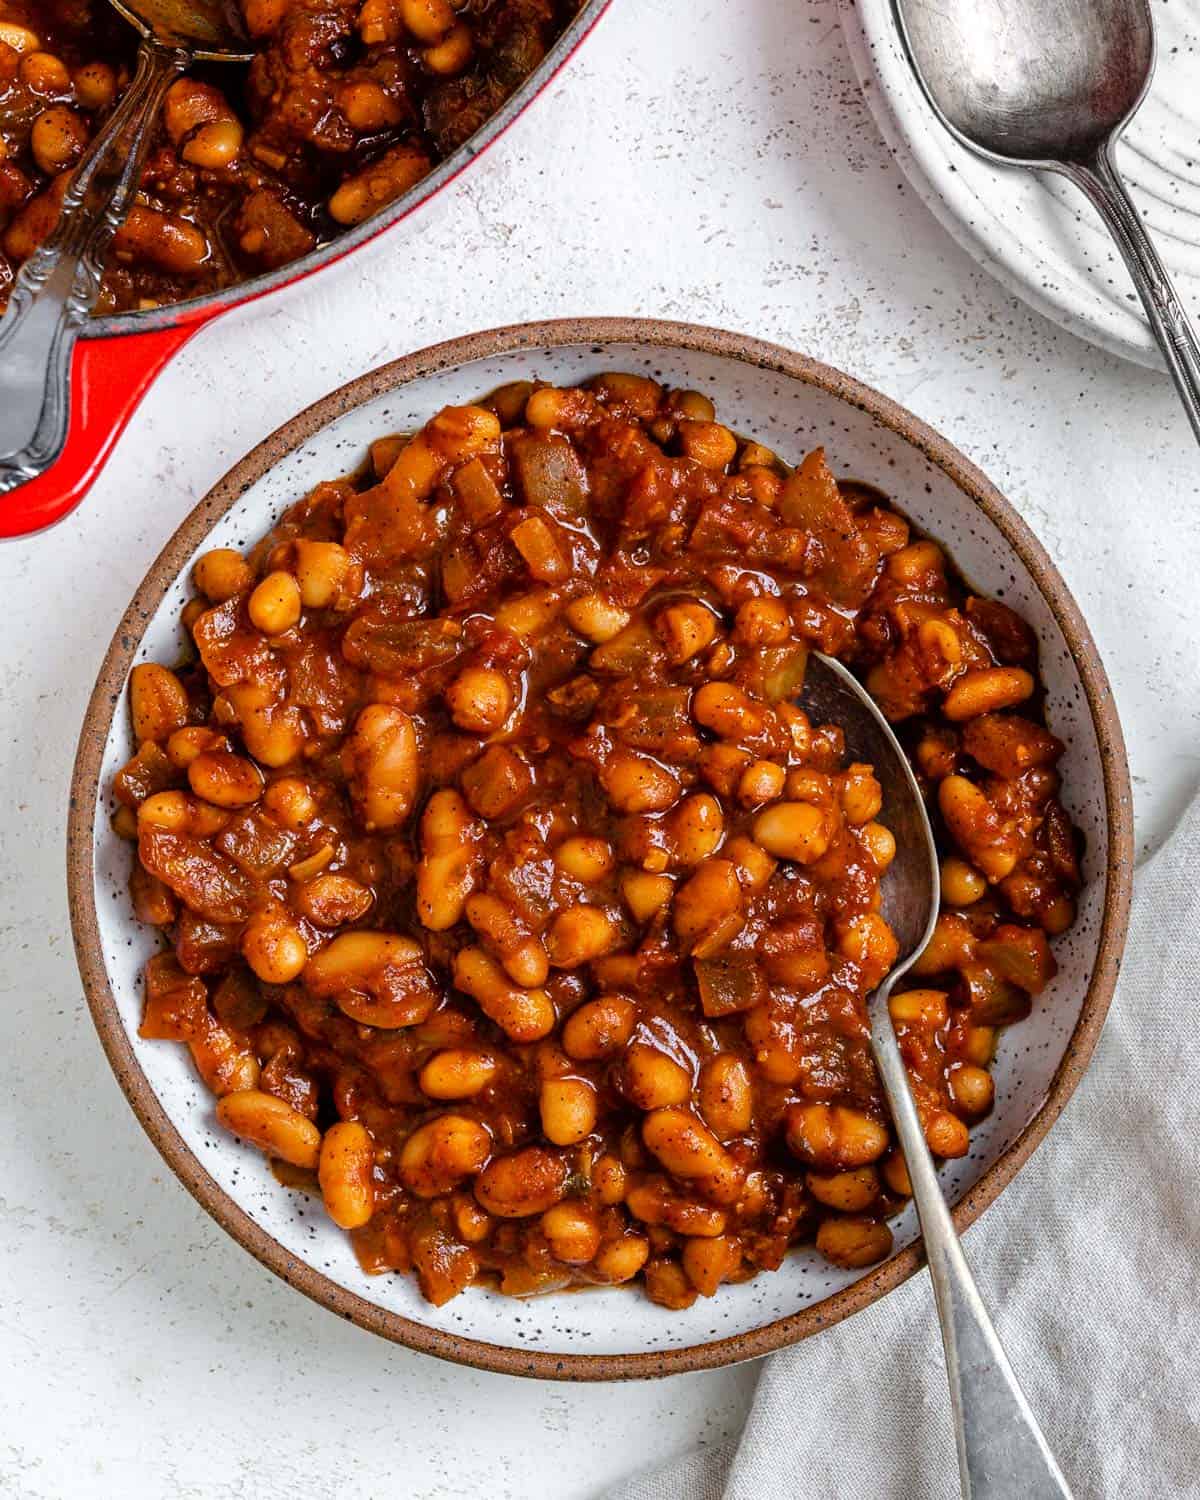 completed Homemade Vegan Baked Beans [Boston Style] plated in a bowl against a light surface